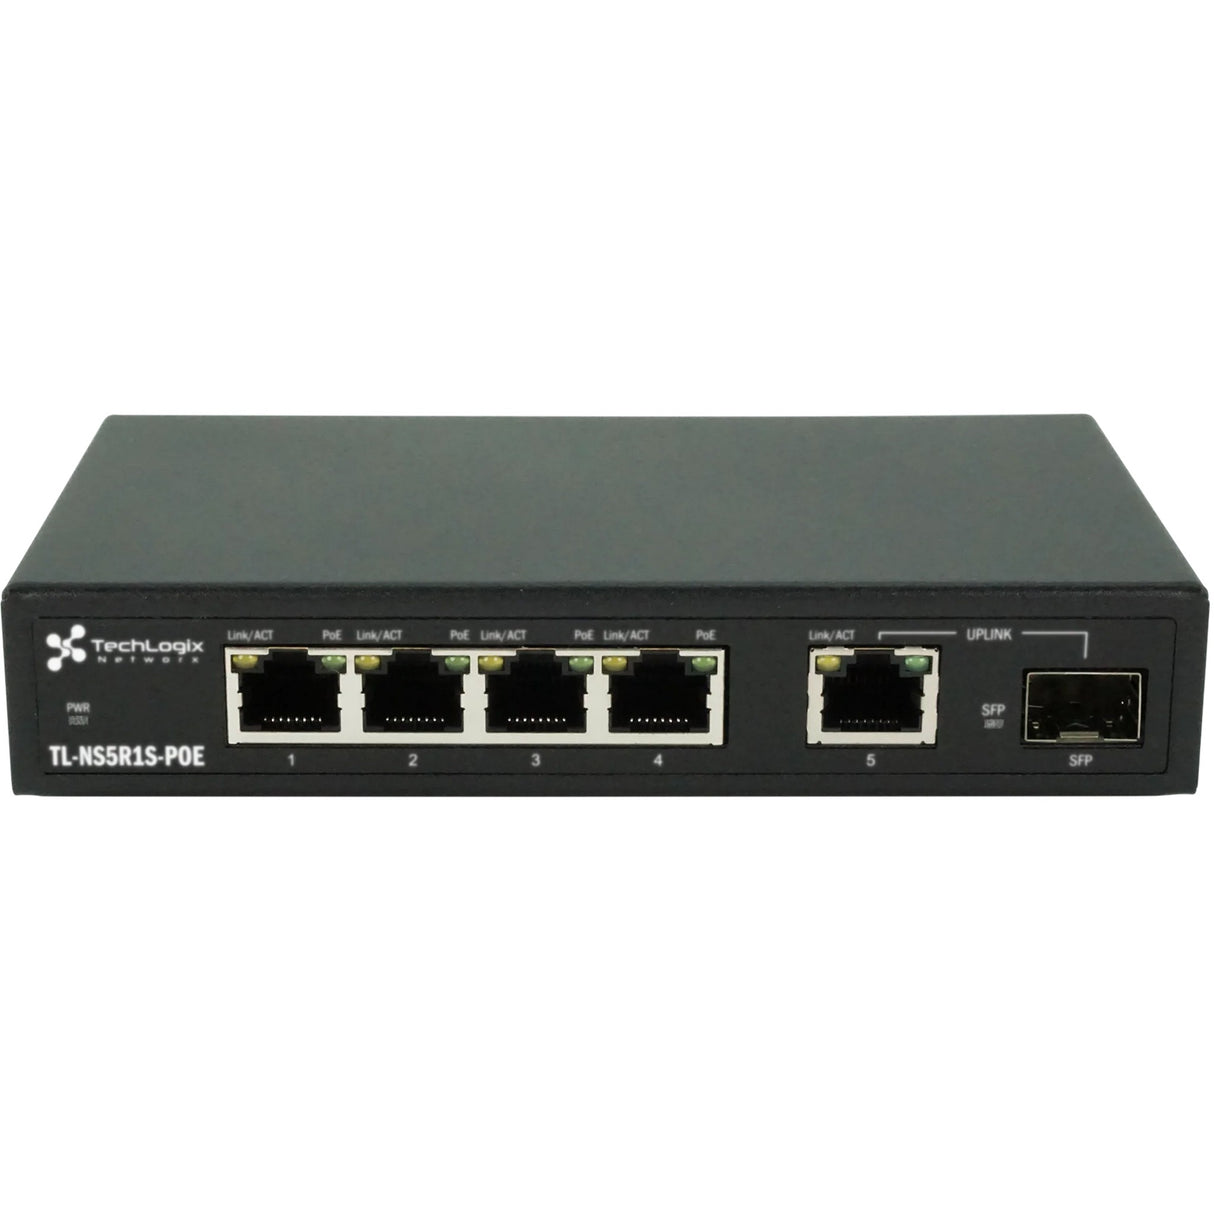 TechLogix Networx TL-NS5R1S-POE 1G Network Switch with 5 RJ45 and 1 SFP, 30W PoE+